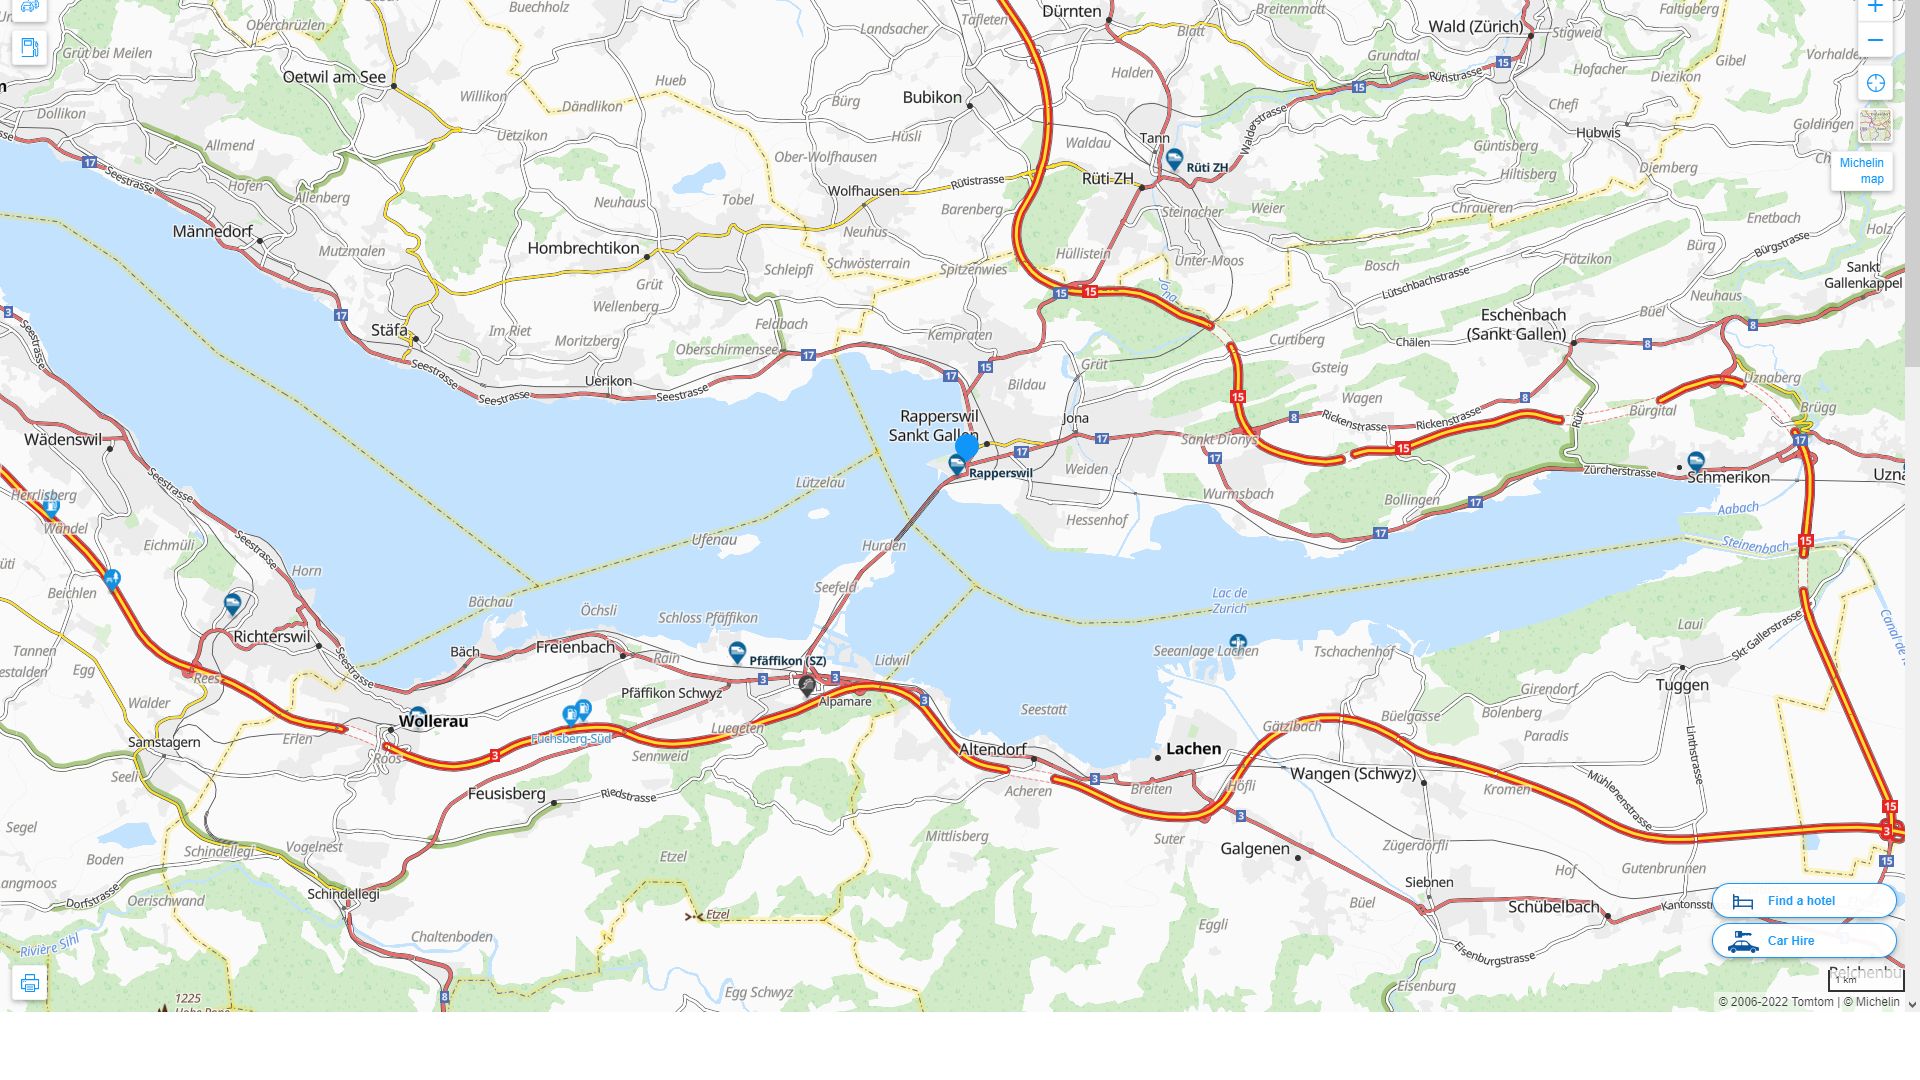 Rapperswil Jona Highway and Road Map